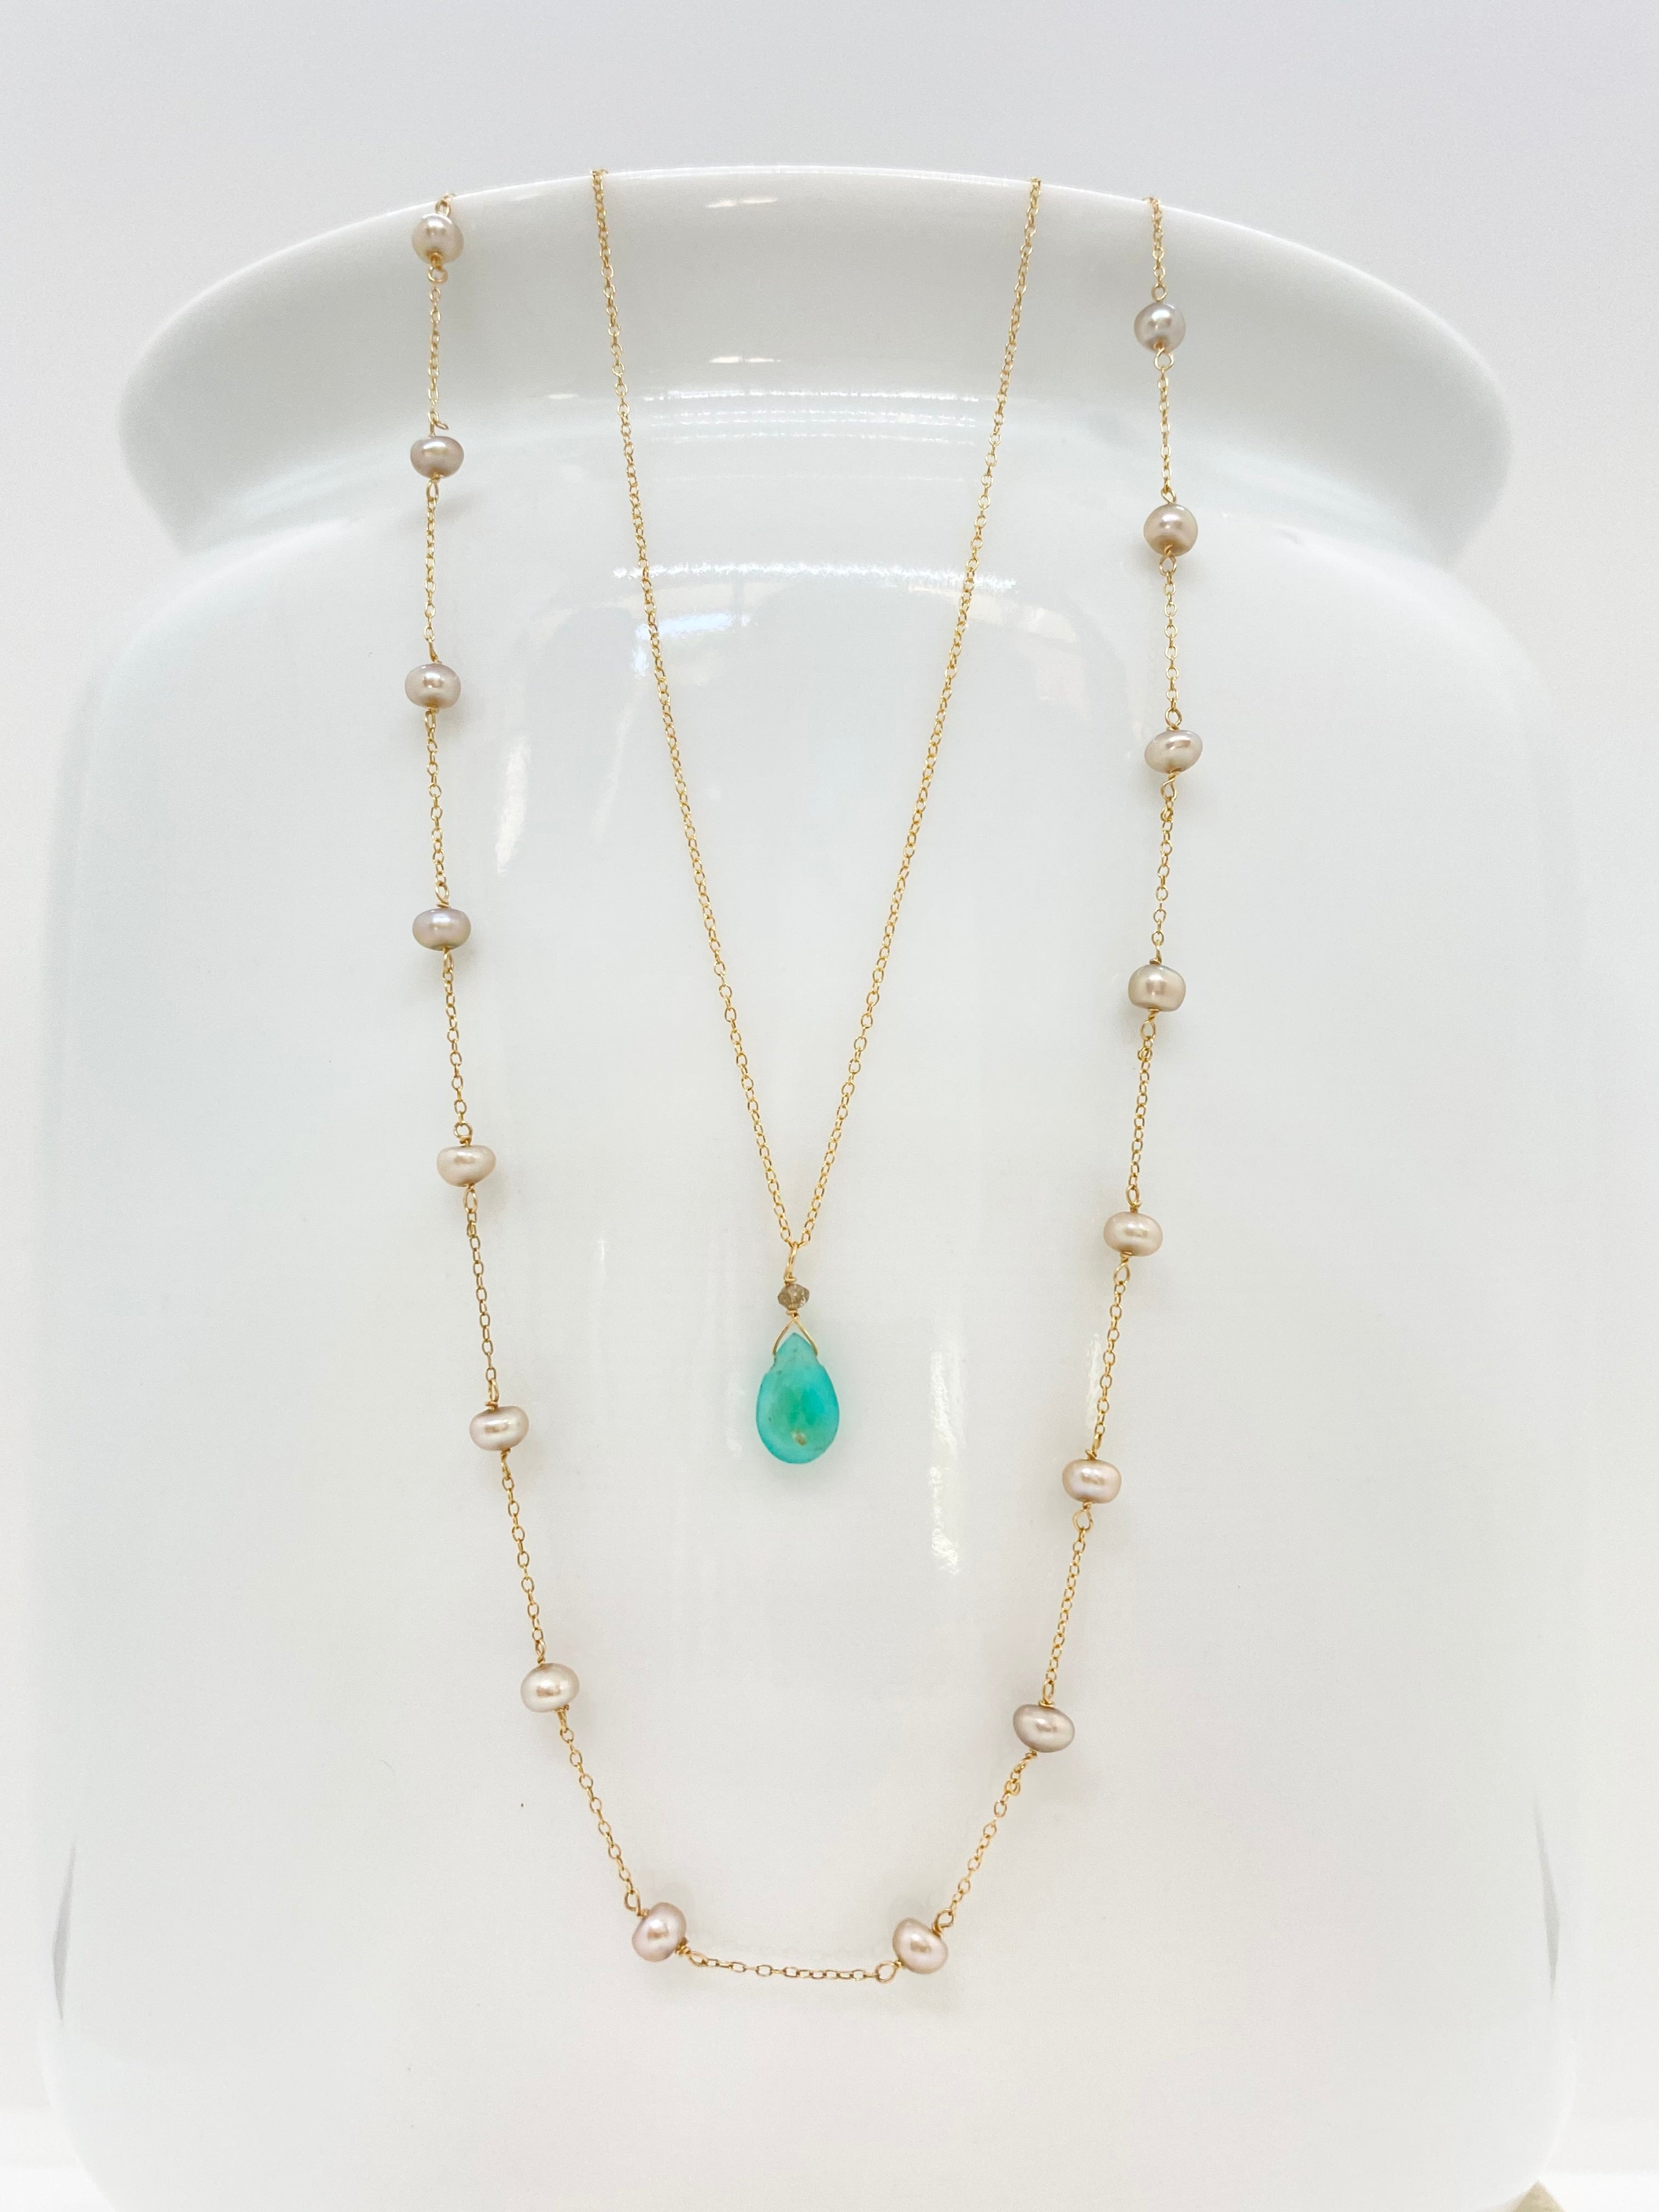 14k Gold Chain Necklace w/ Freshwater Pearls